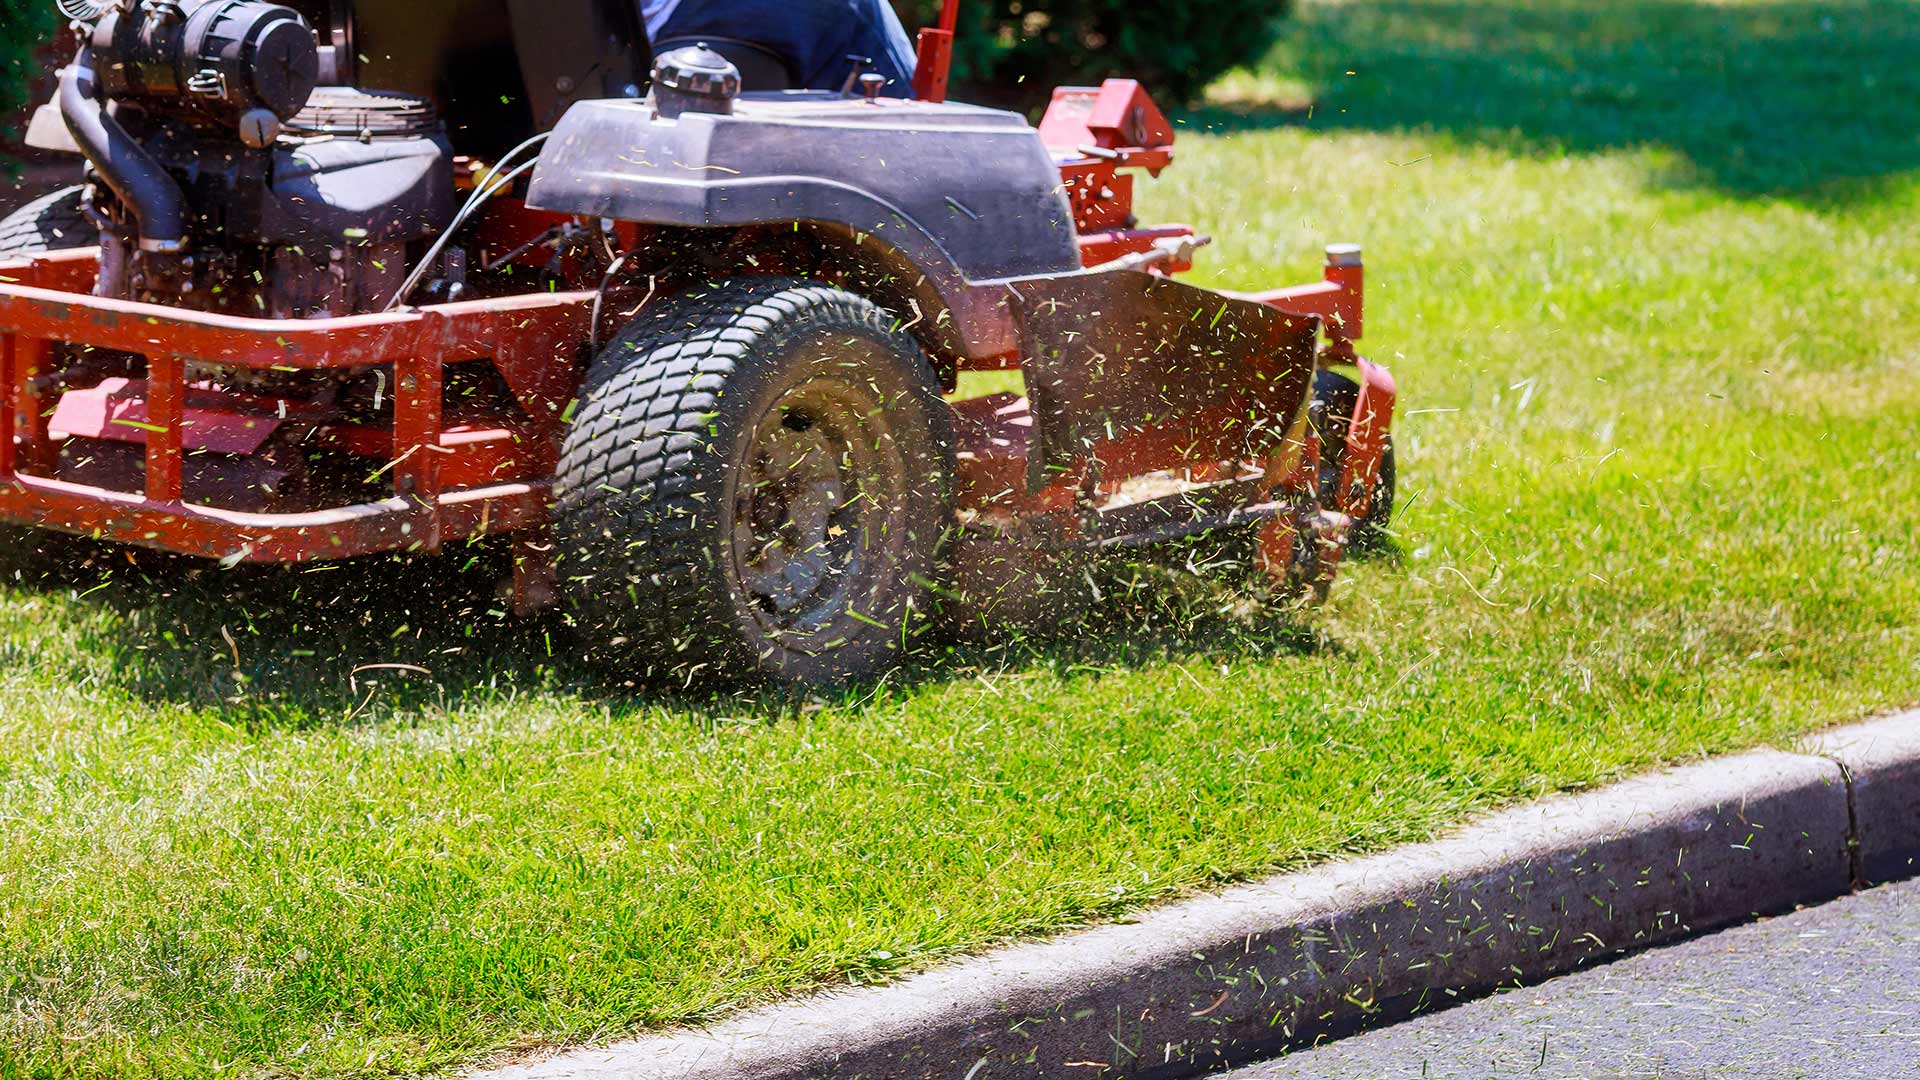 A lawn mower is cutting the grass of a healthy lawn near The Villages, FL.